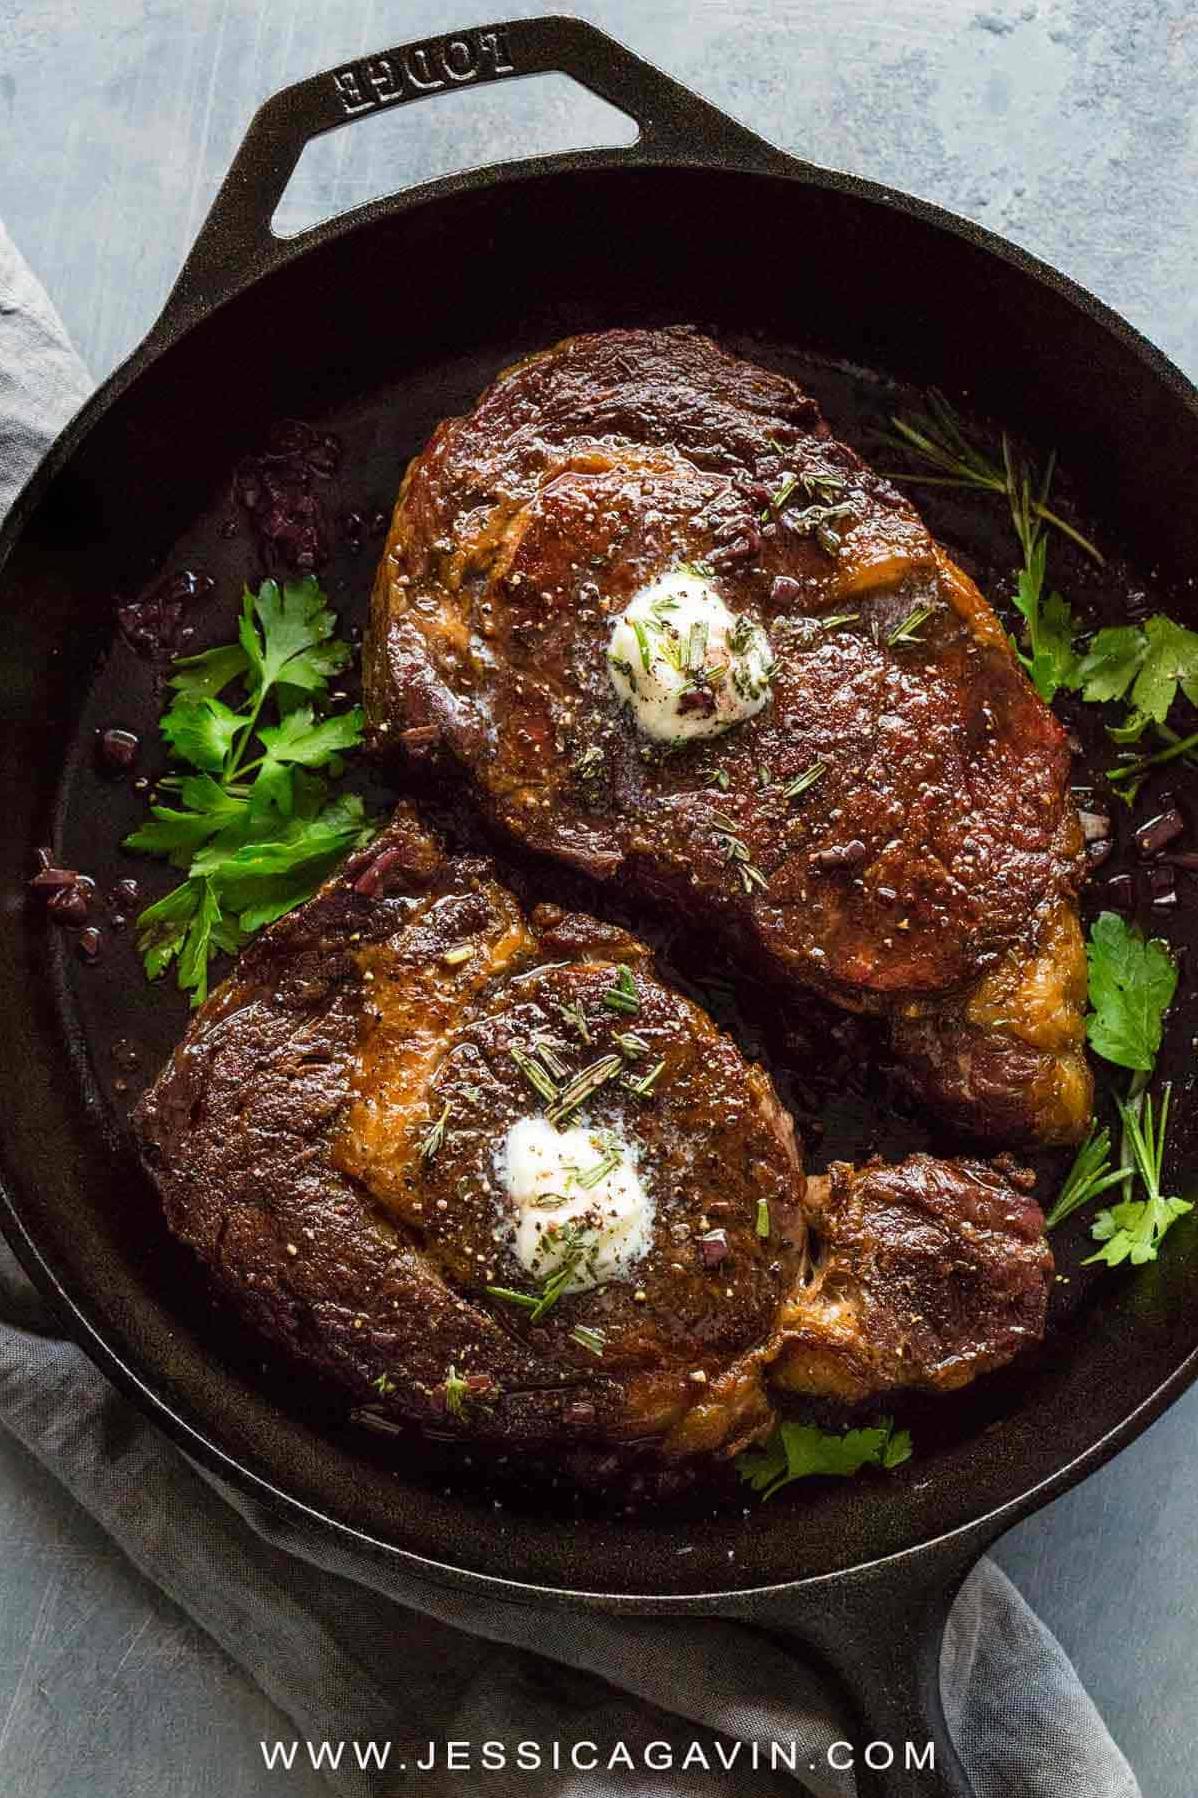  The perfect Sunday dinner: red wine ribeyes and a glass of red wine.